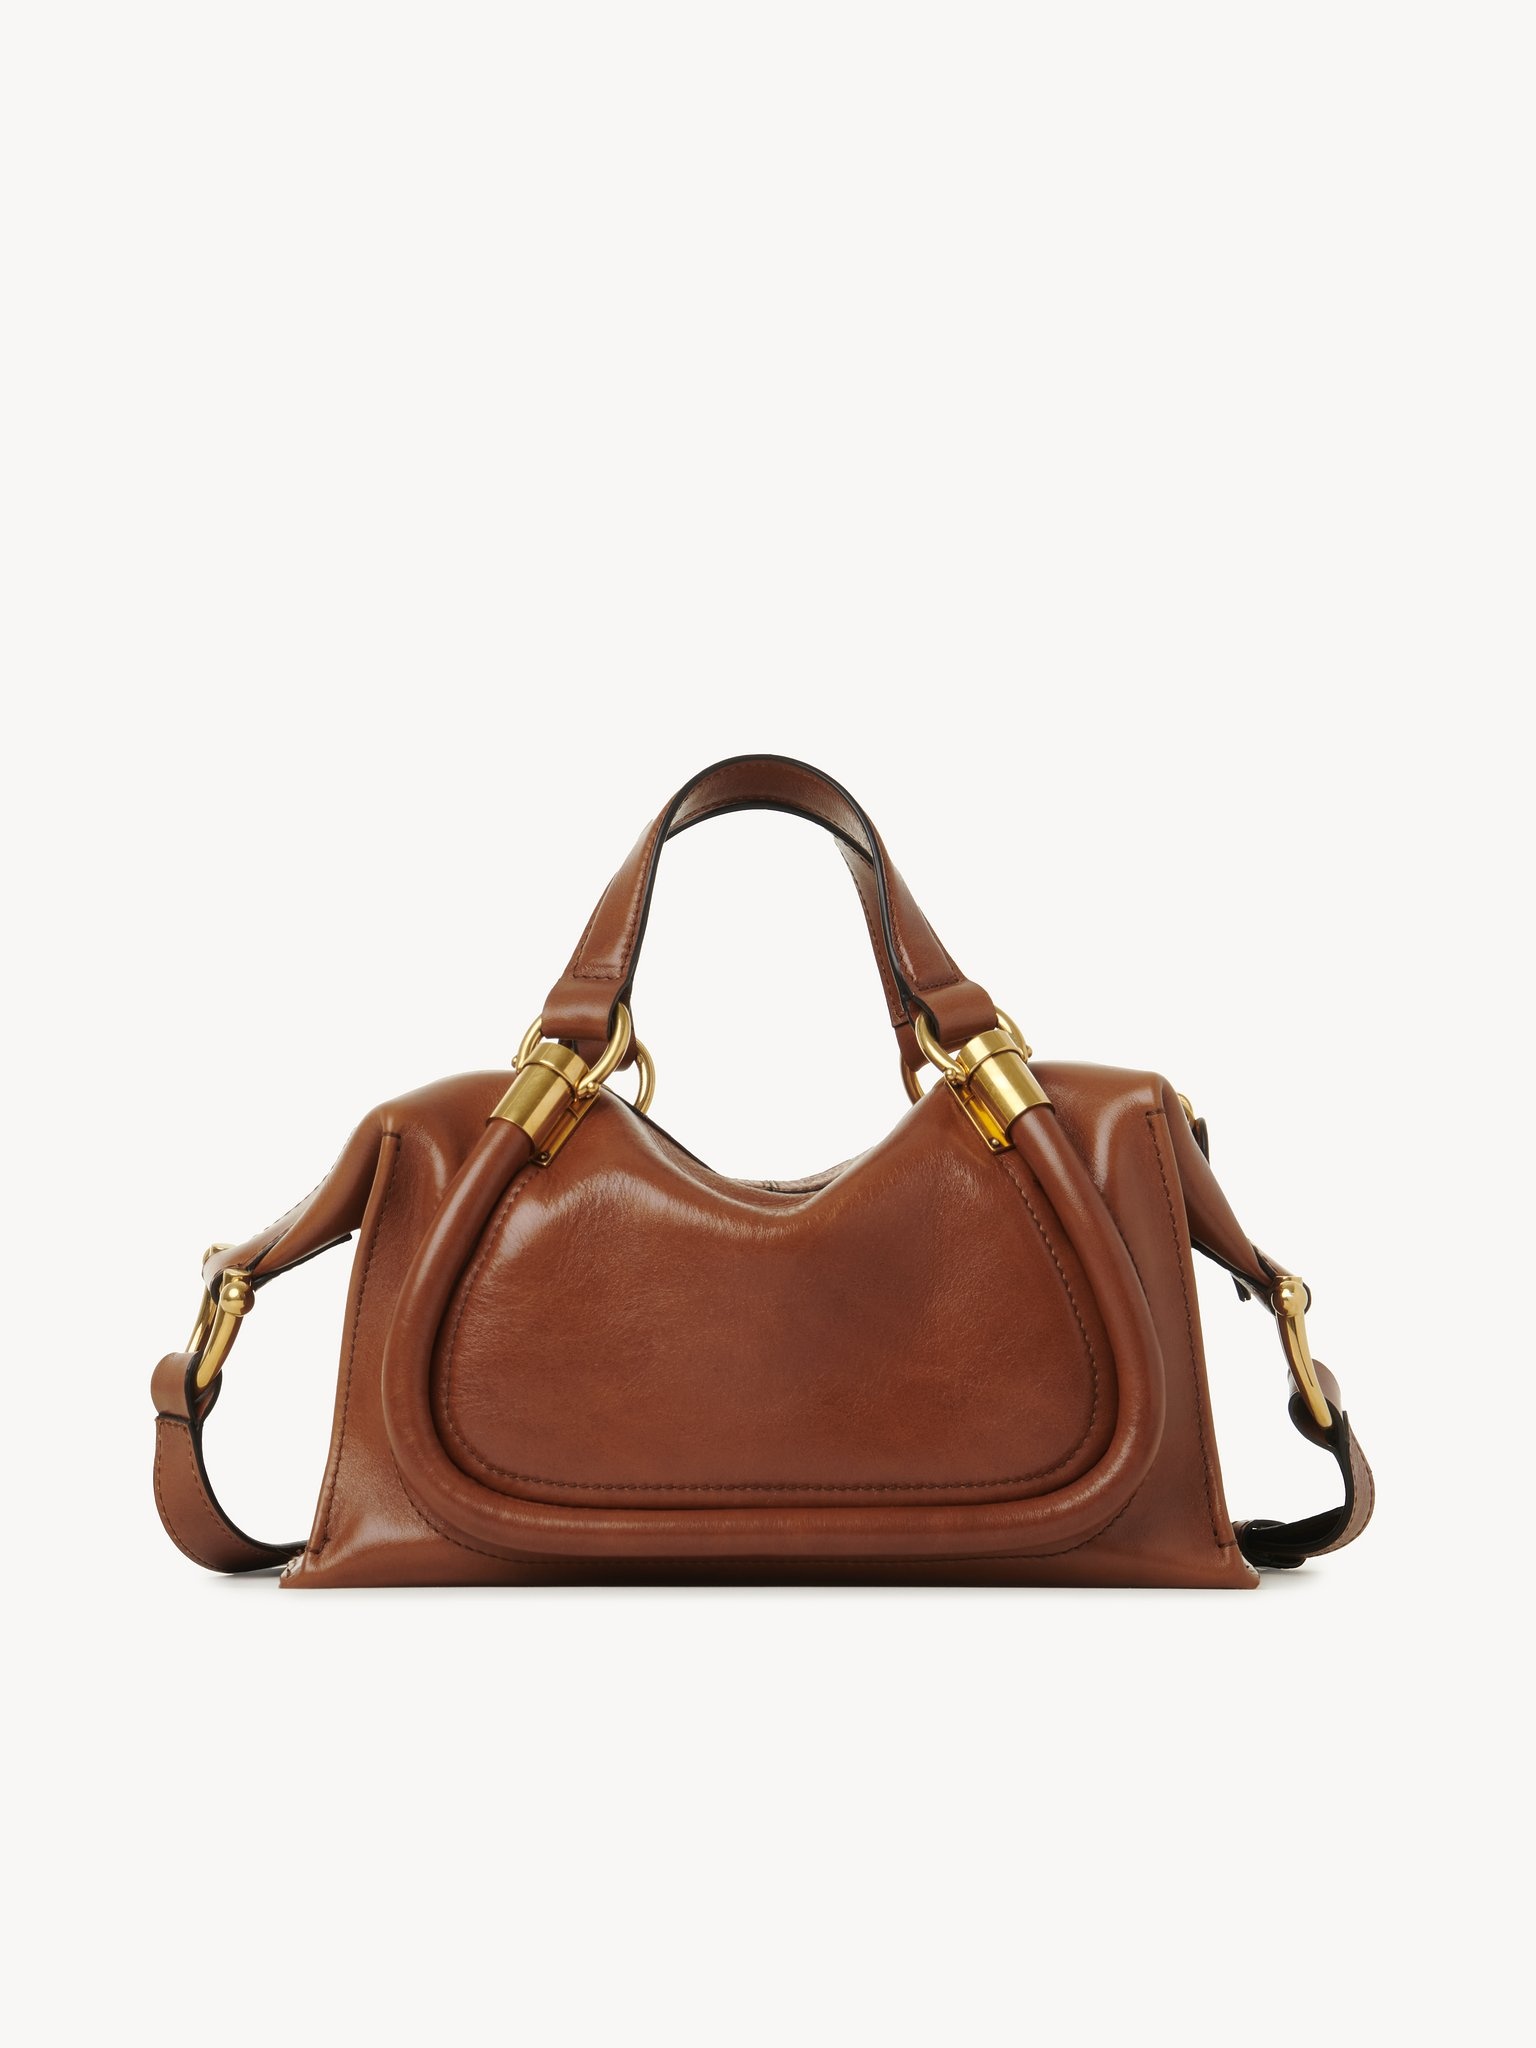 SMALL PARATY 24 BAG IN SOFT LEATHER - 4